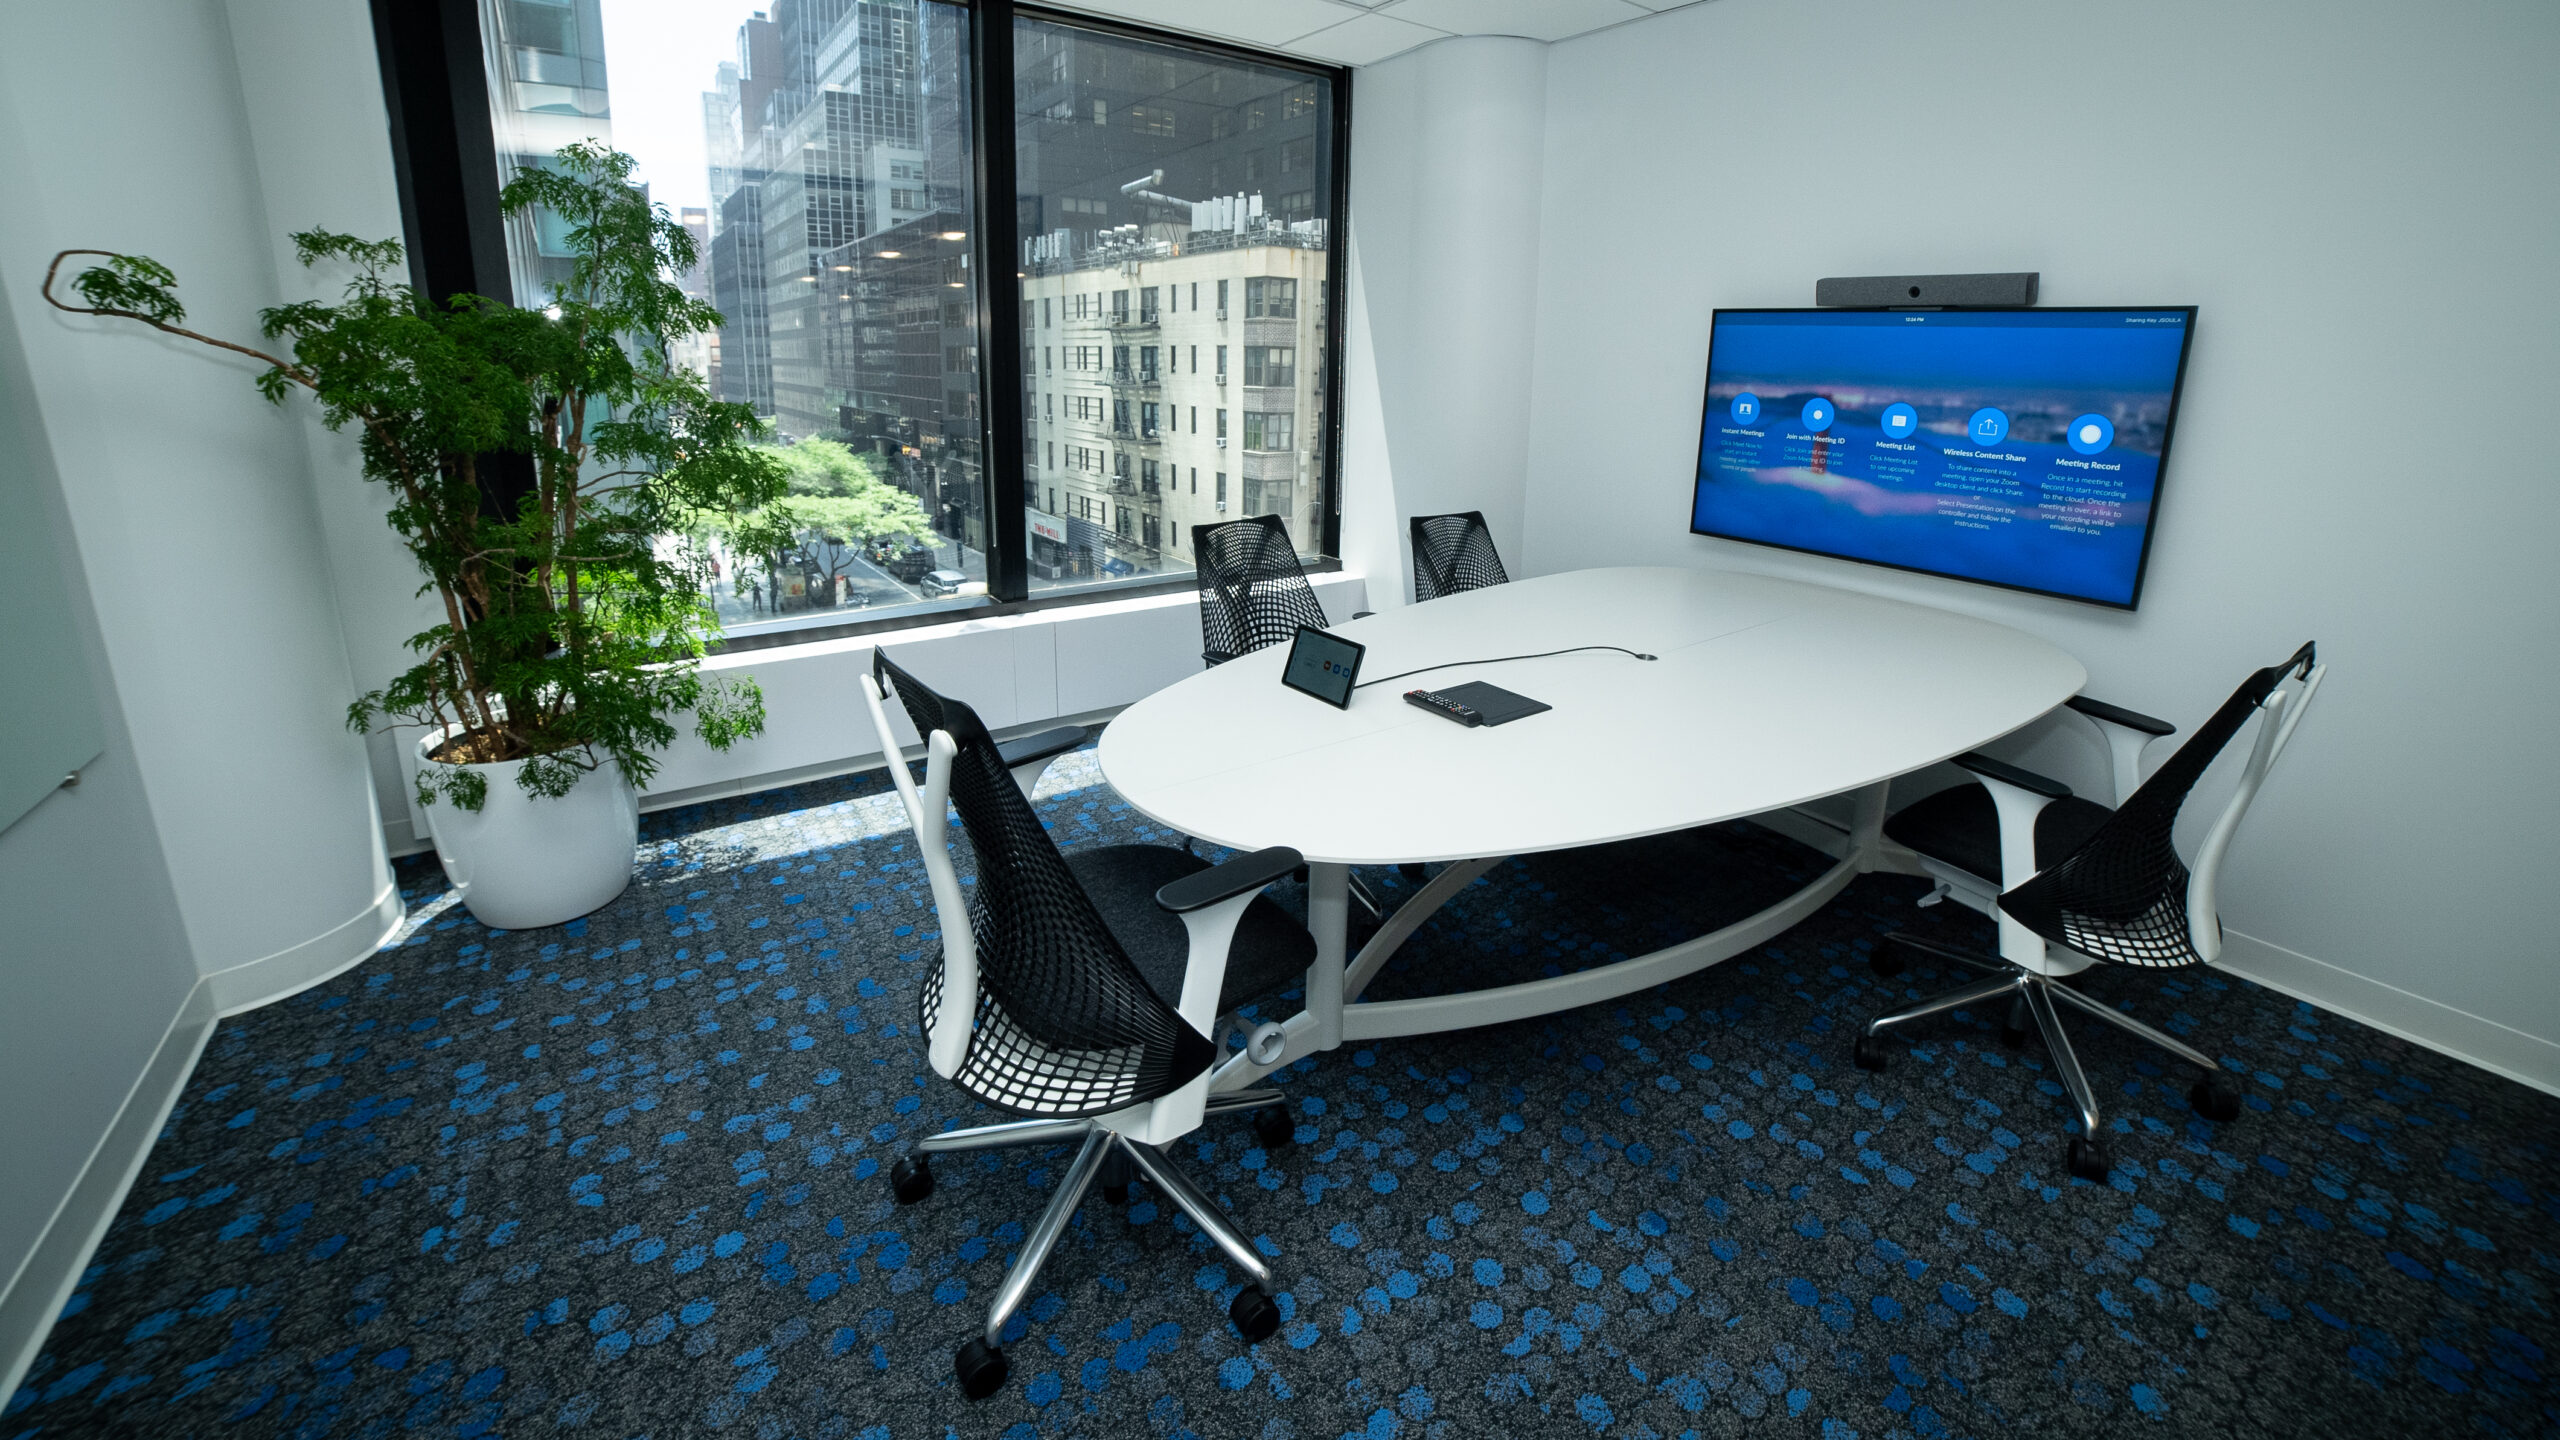 F5 Networks - Conference Room | Talisen Construction